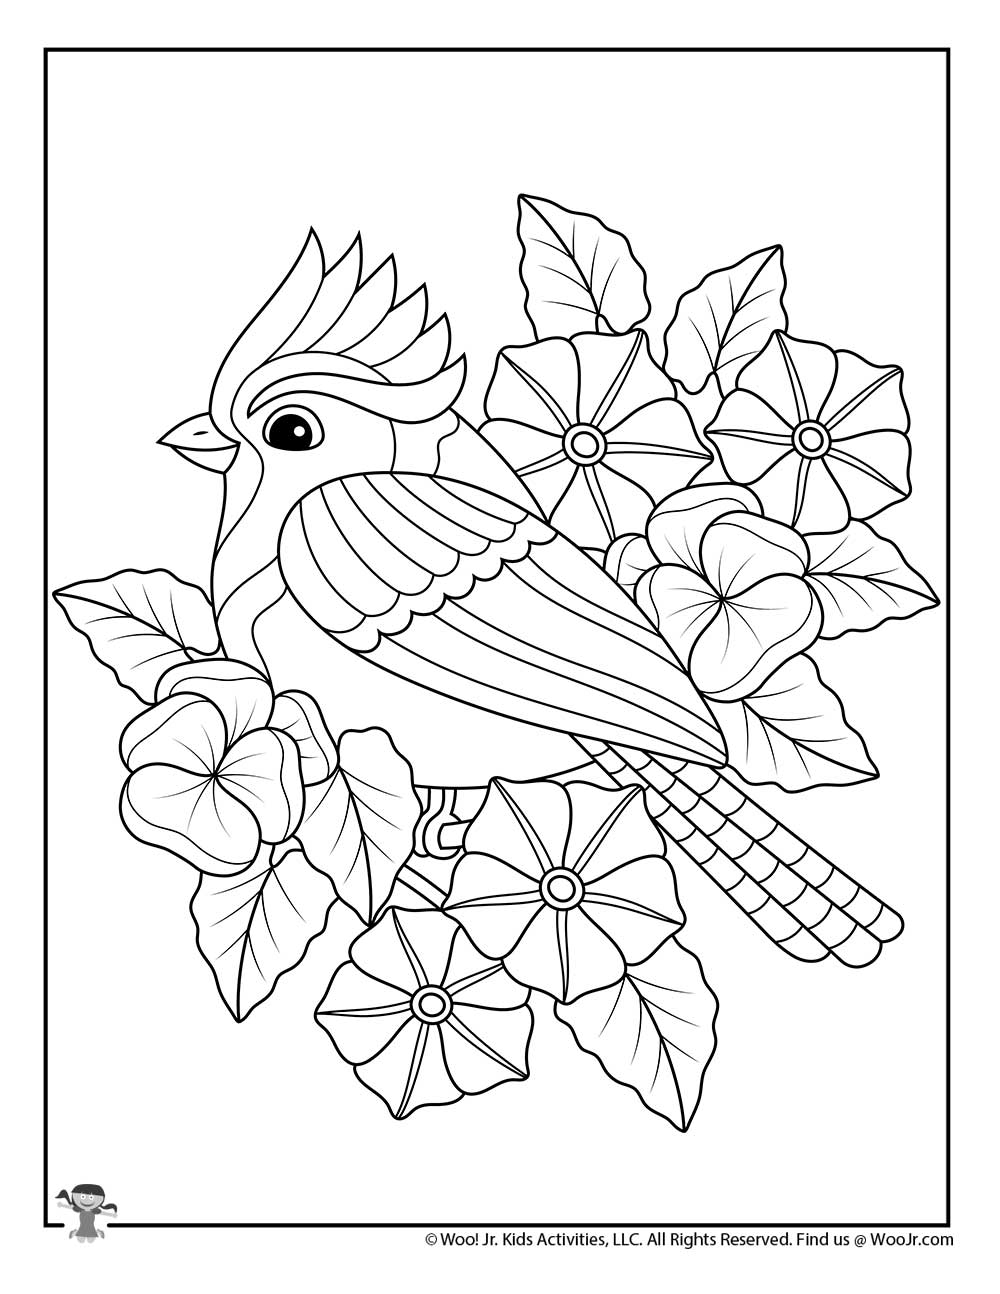 Spring Blue Jay Easy Adult Coloring Page | Woo! Jr. Kids Activities :  Children's Publishing